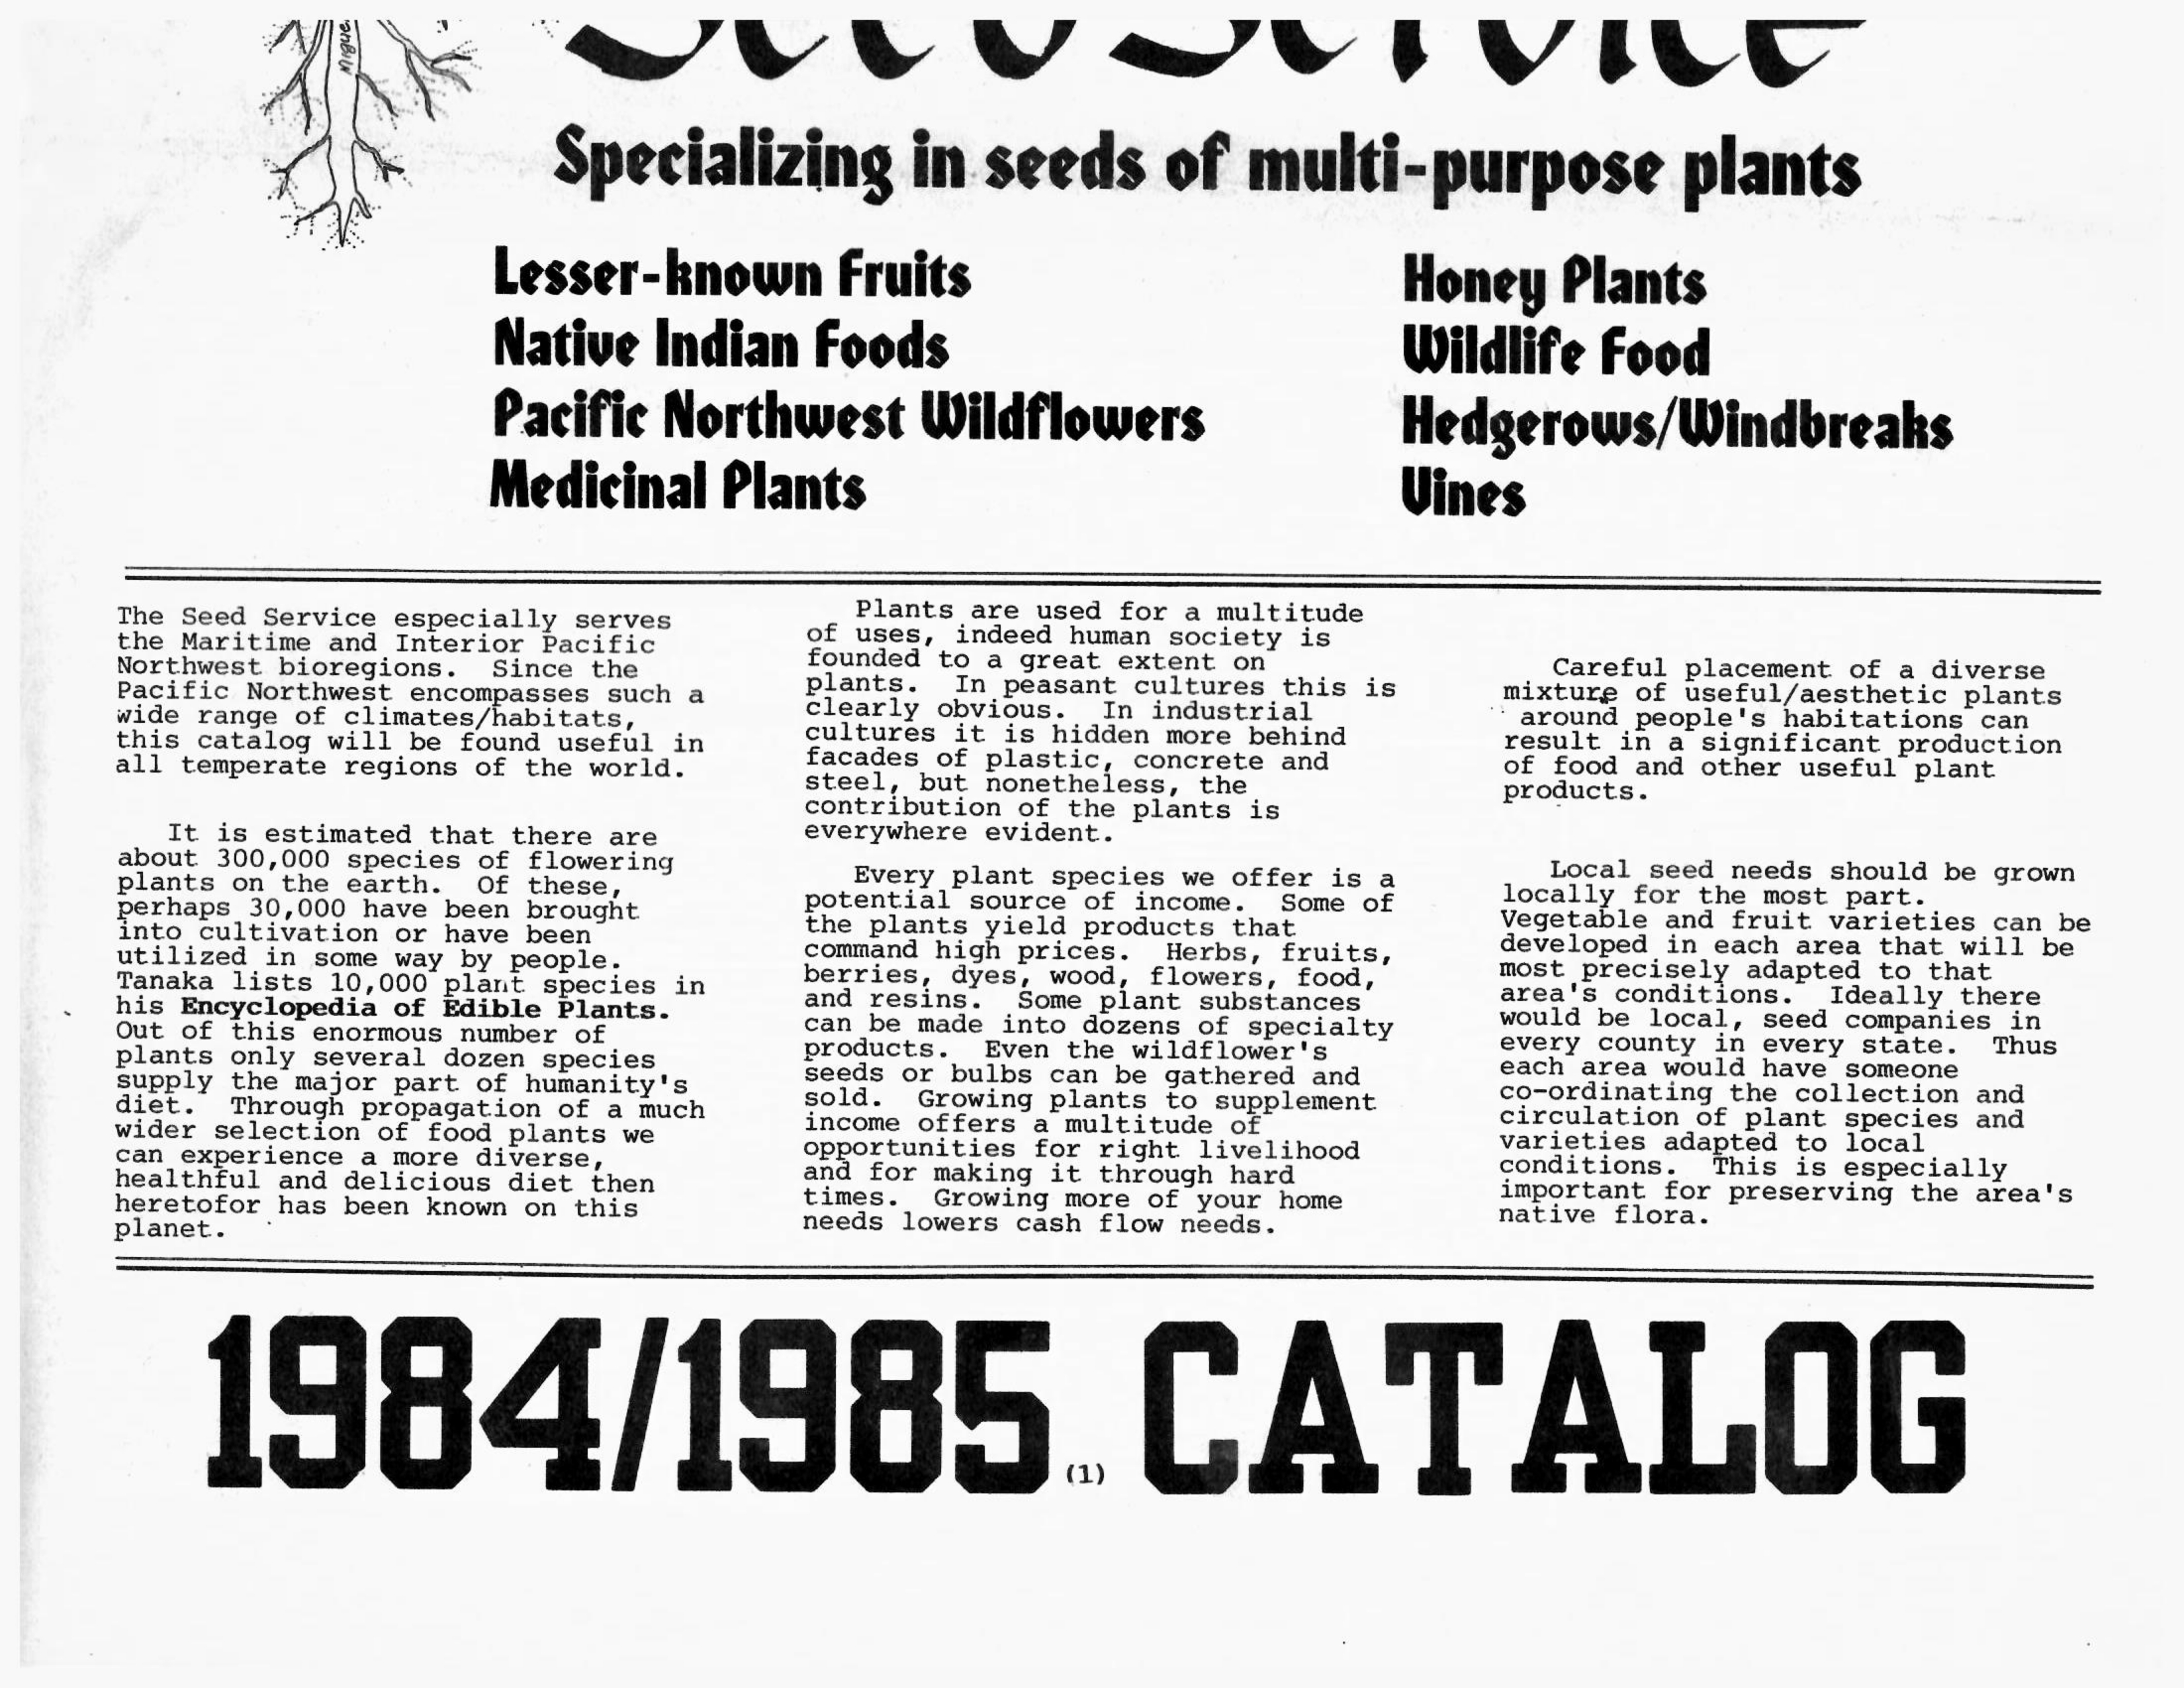 Seed Service Catalog 1984 '85 Part 2-02